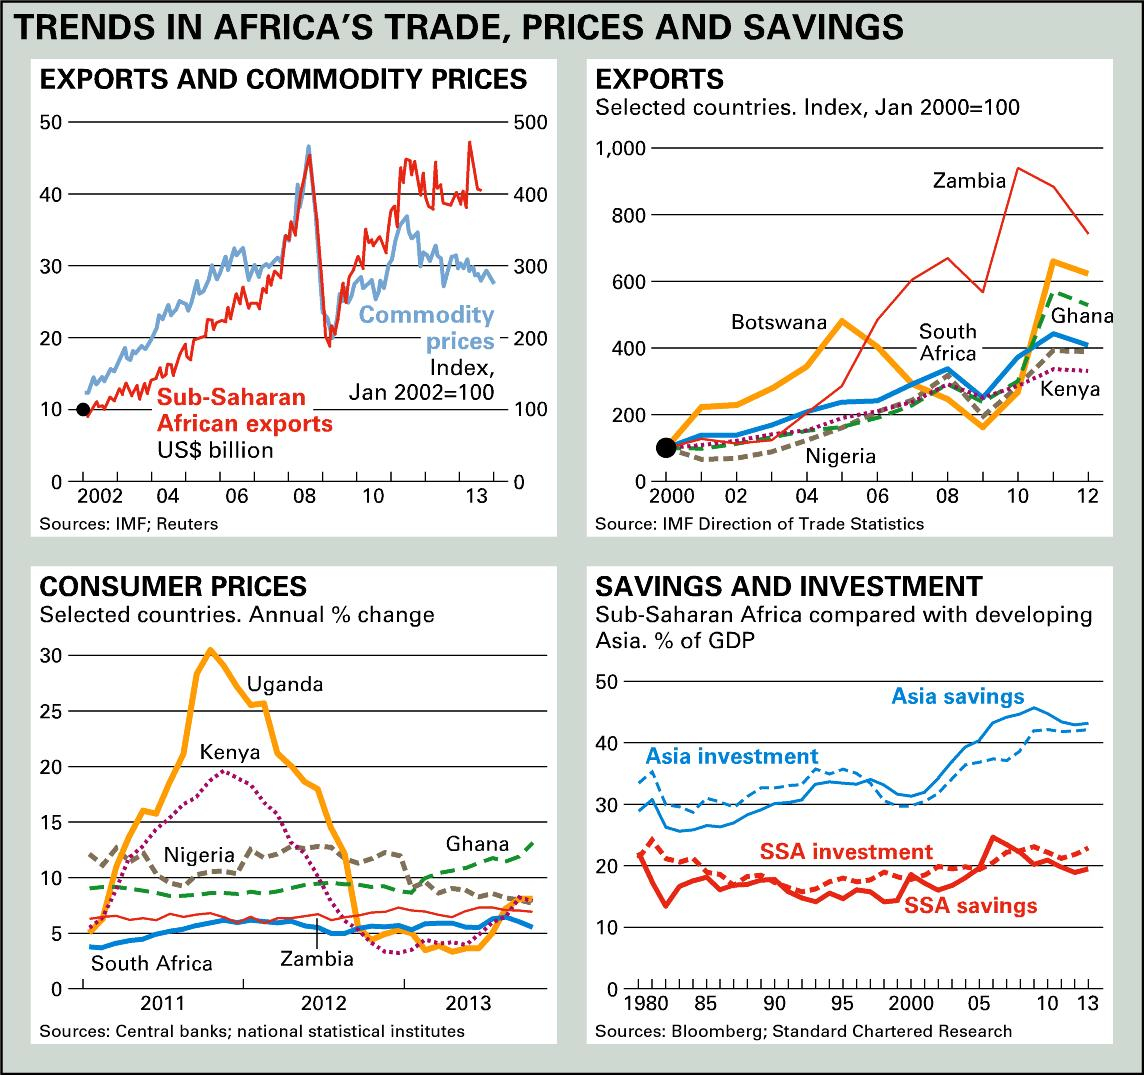 Trends in Africa's trade, prices and savings